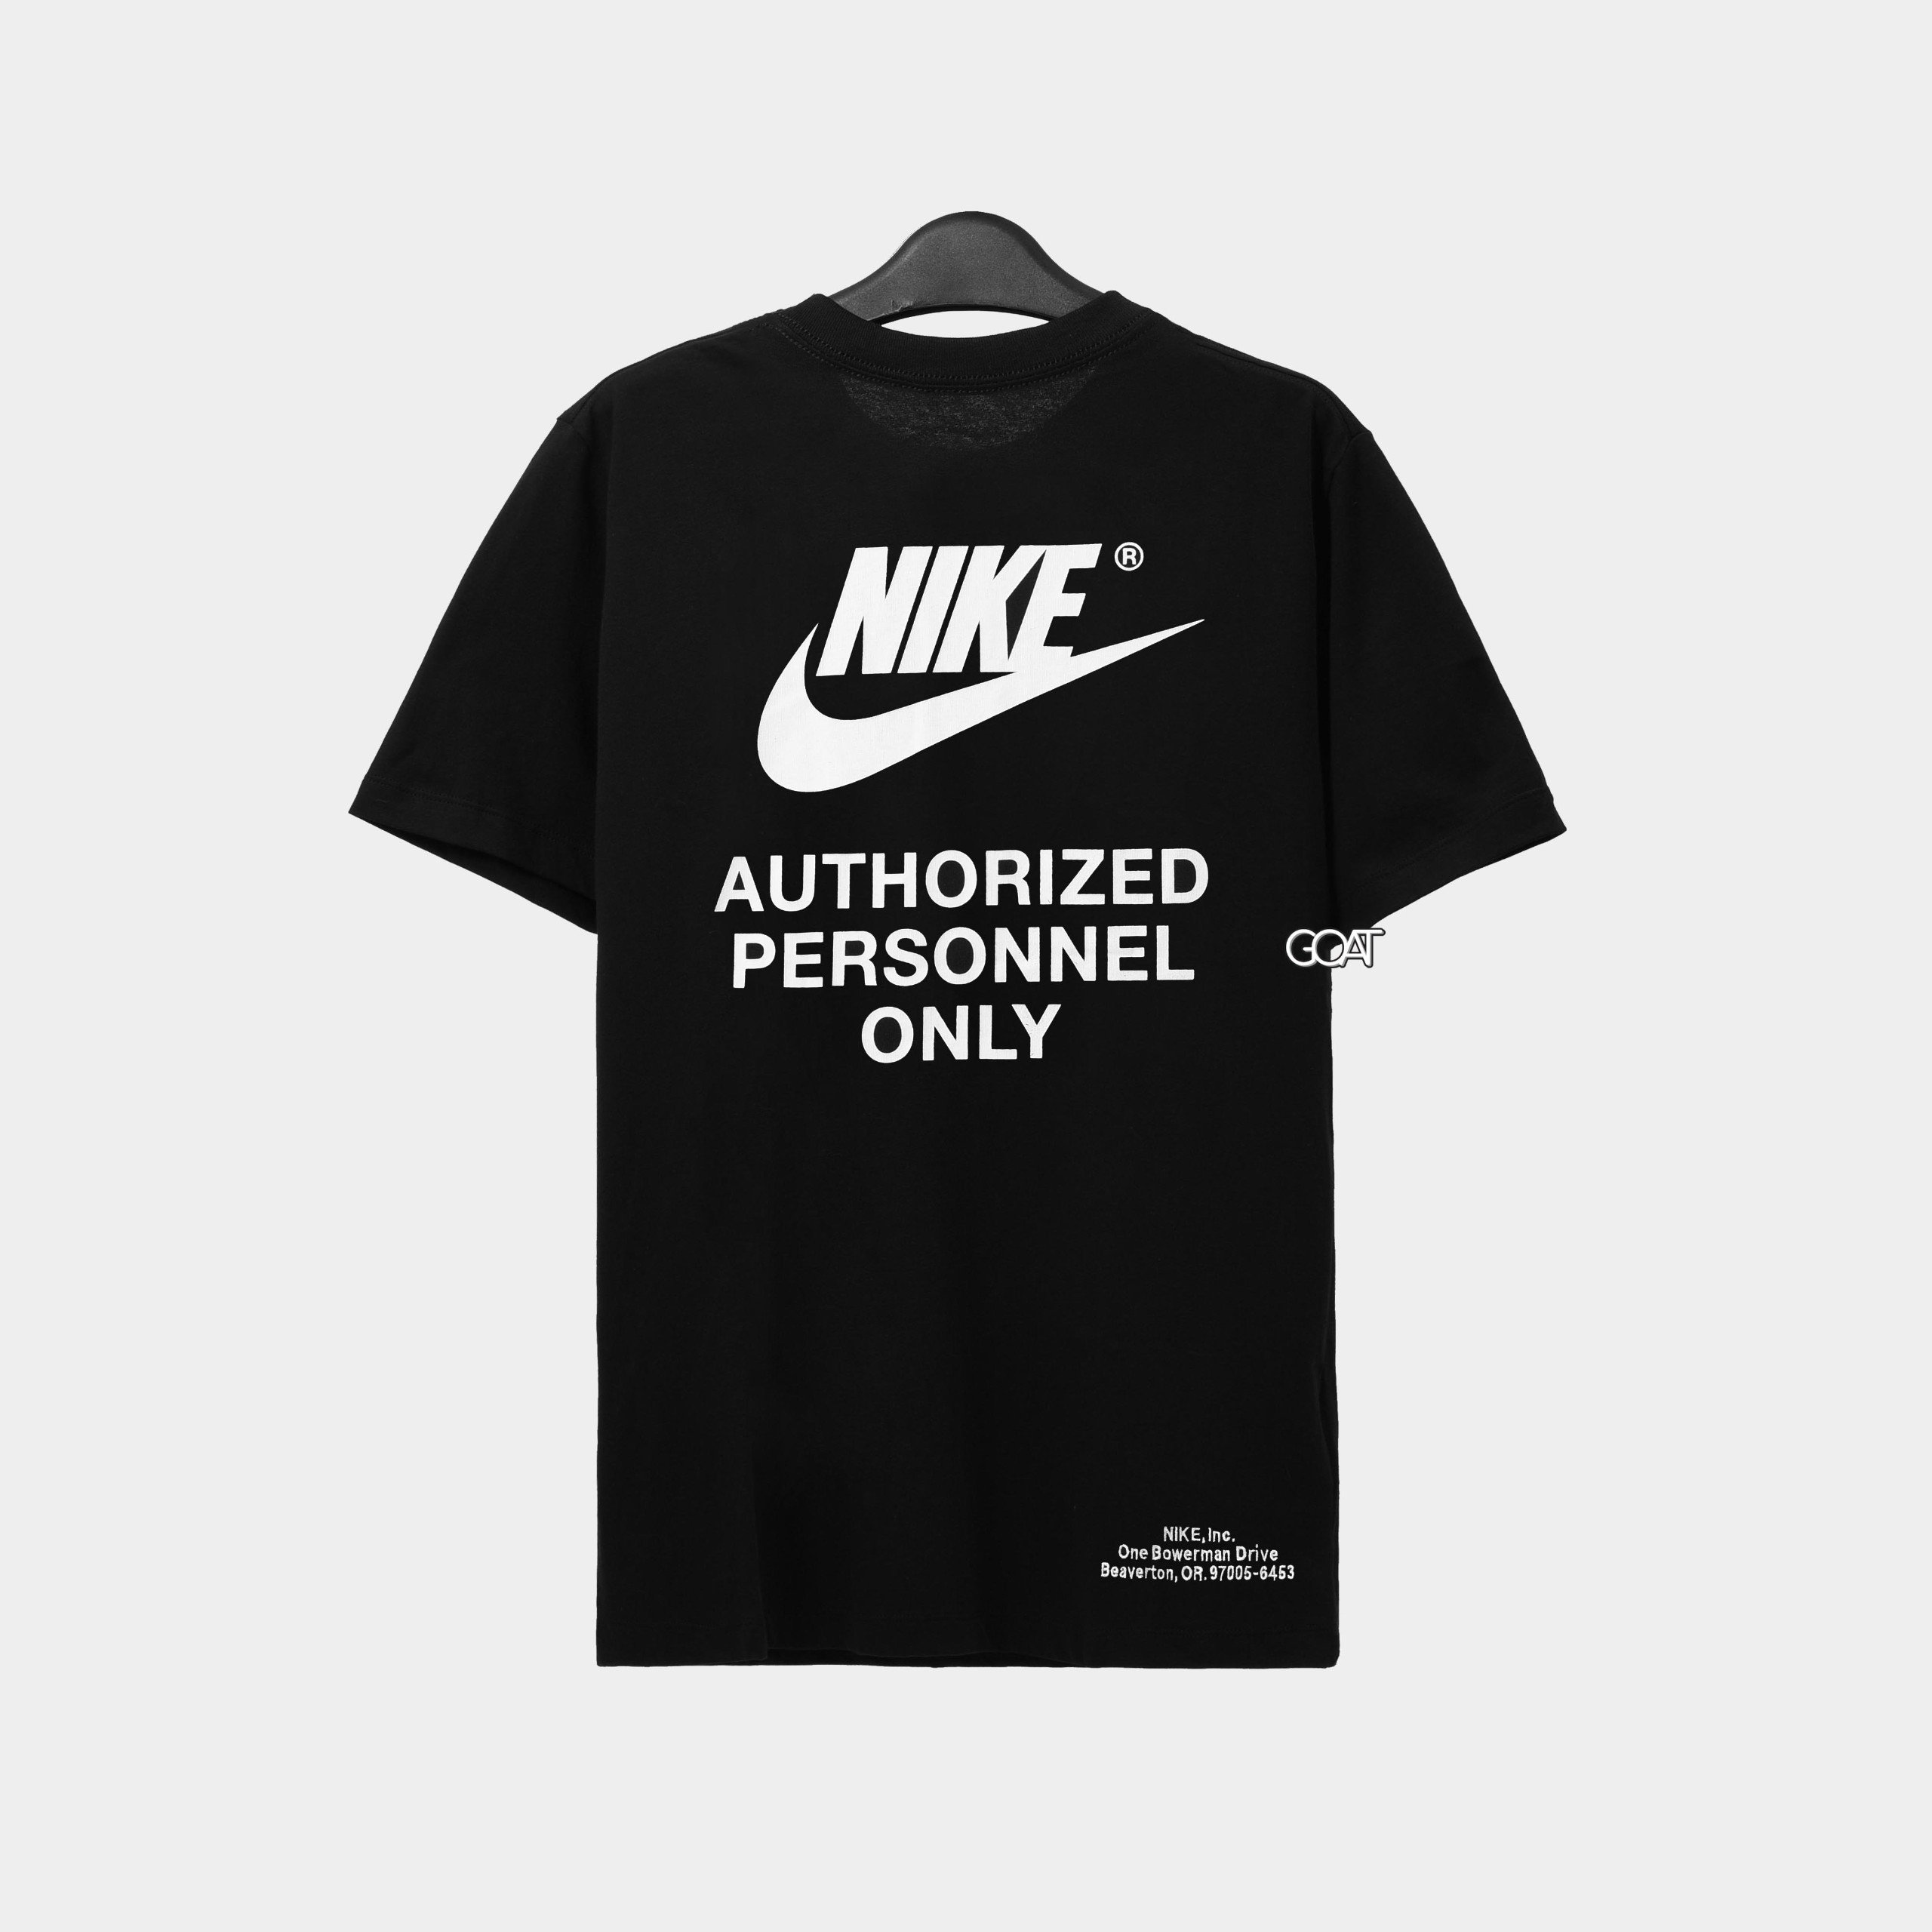 NIKE AUTHORIZED PRESONNEL ONLY T-SHIRT - BLACK